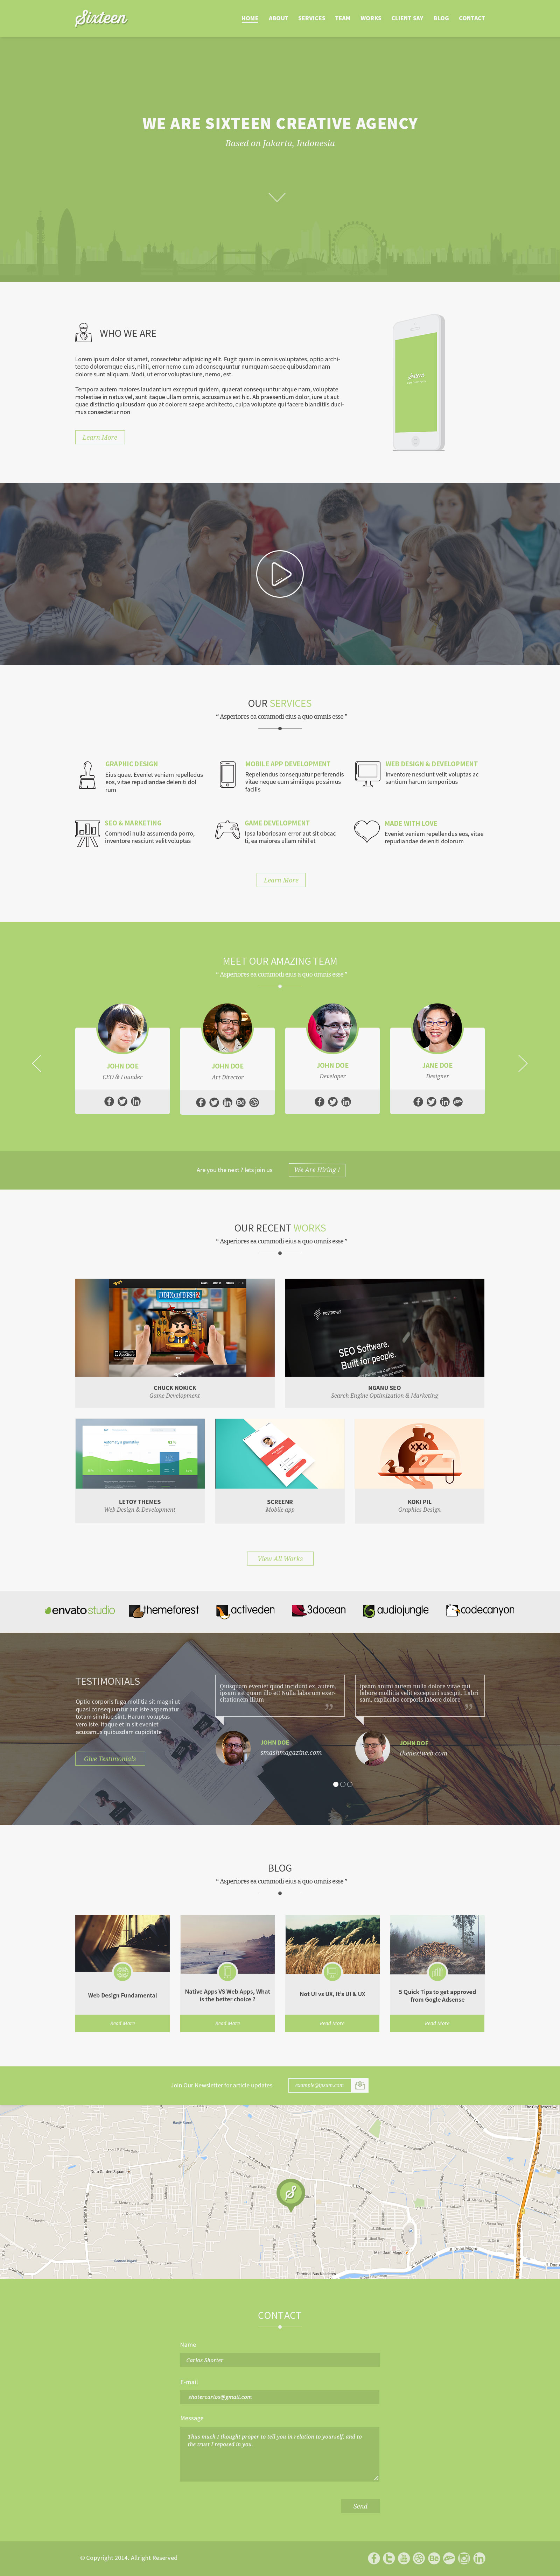 Sixteen Flat One Page Agency Template [ Free PSD ]